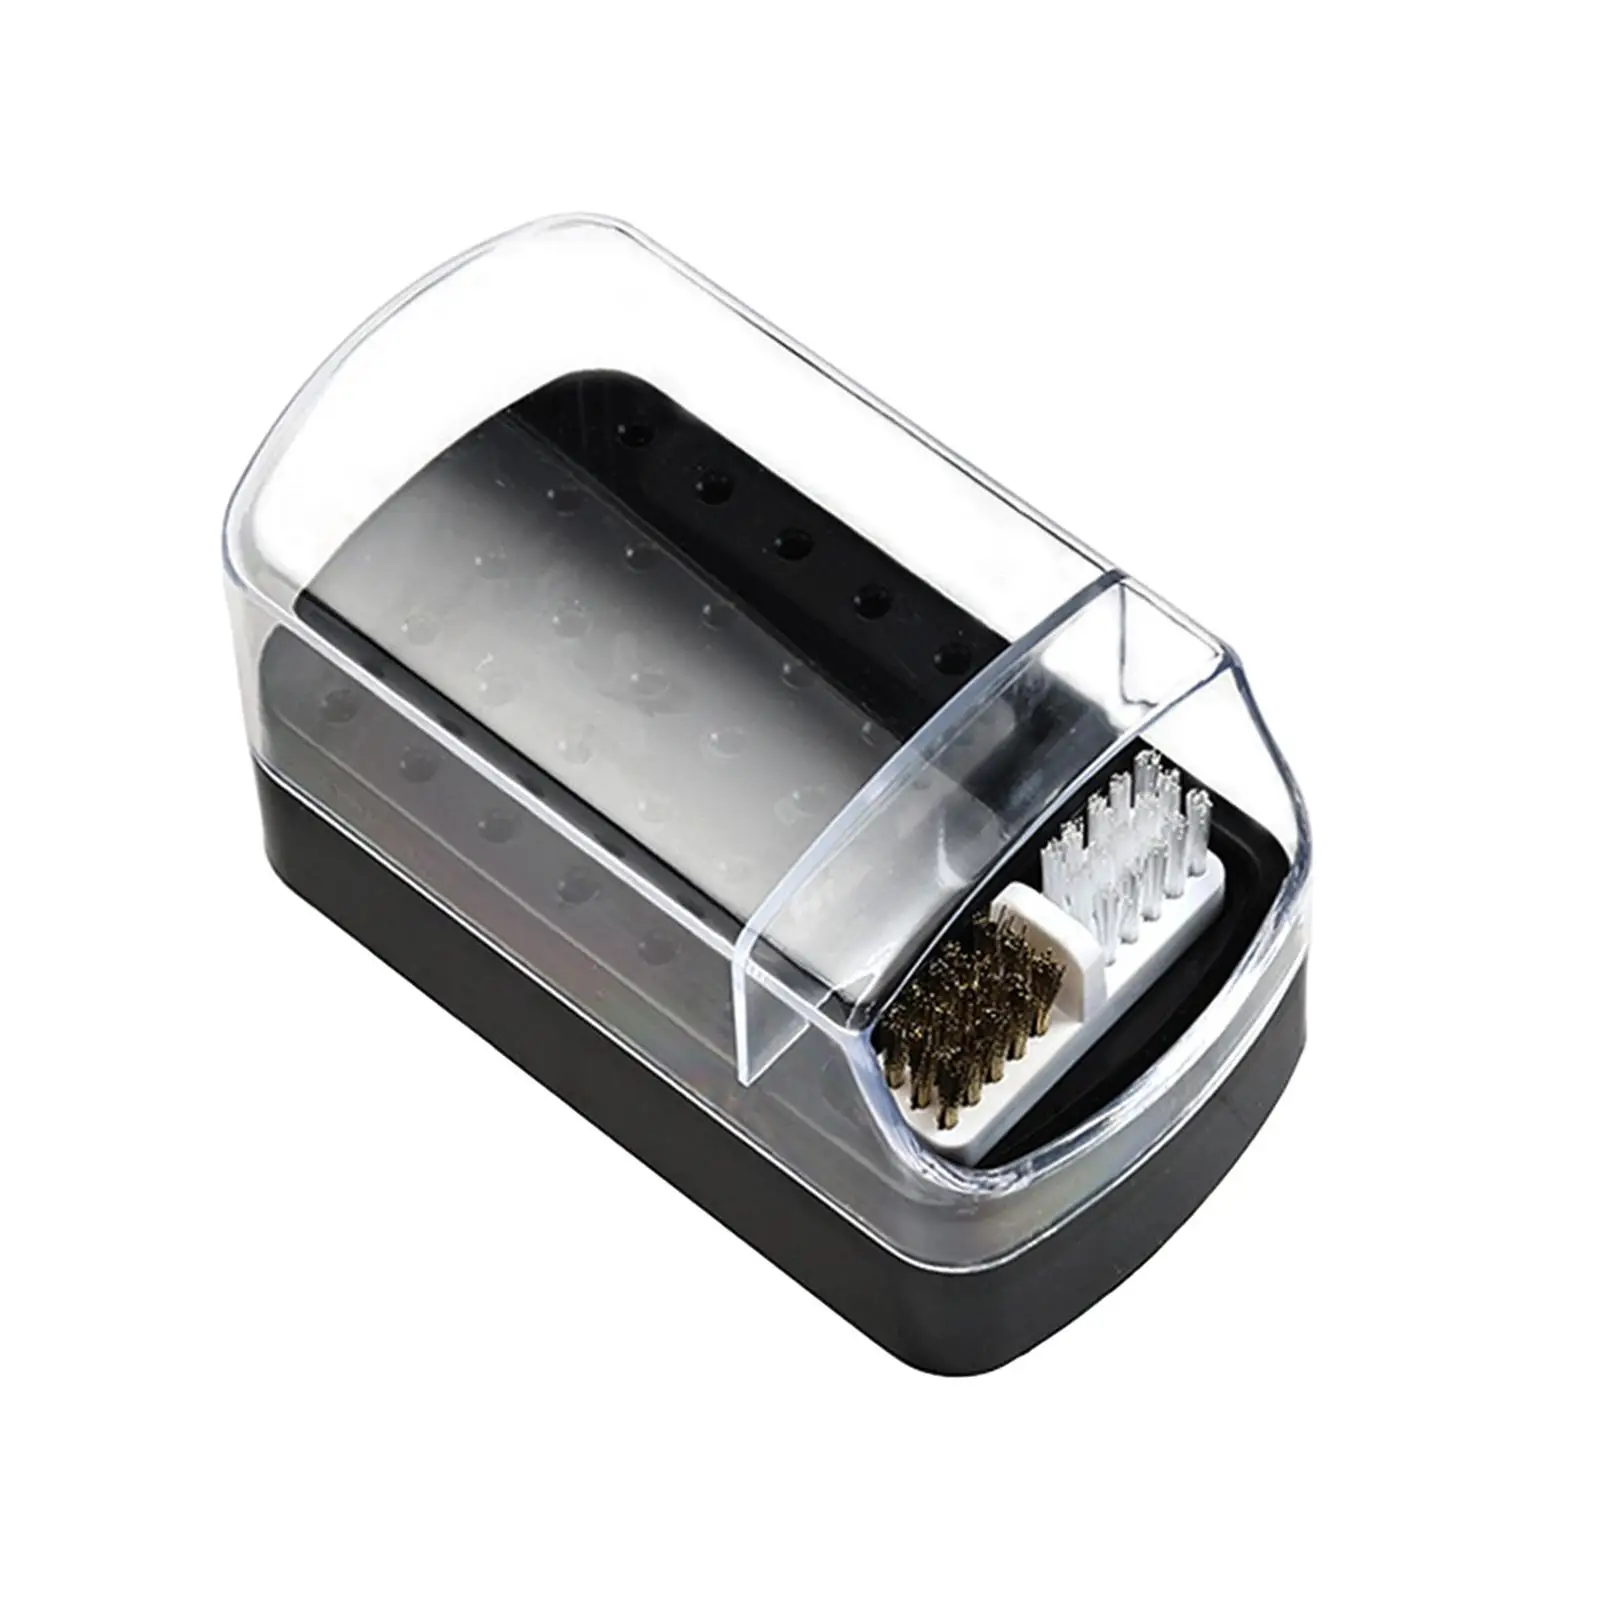 Nail Drill Bit Holder 30 Slots Container Portable Durable with Clear Lid Dustproof Salon Nail Bit Organizer Nail Drill Bit Case